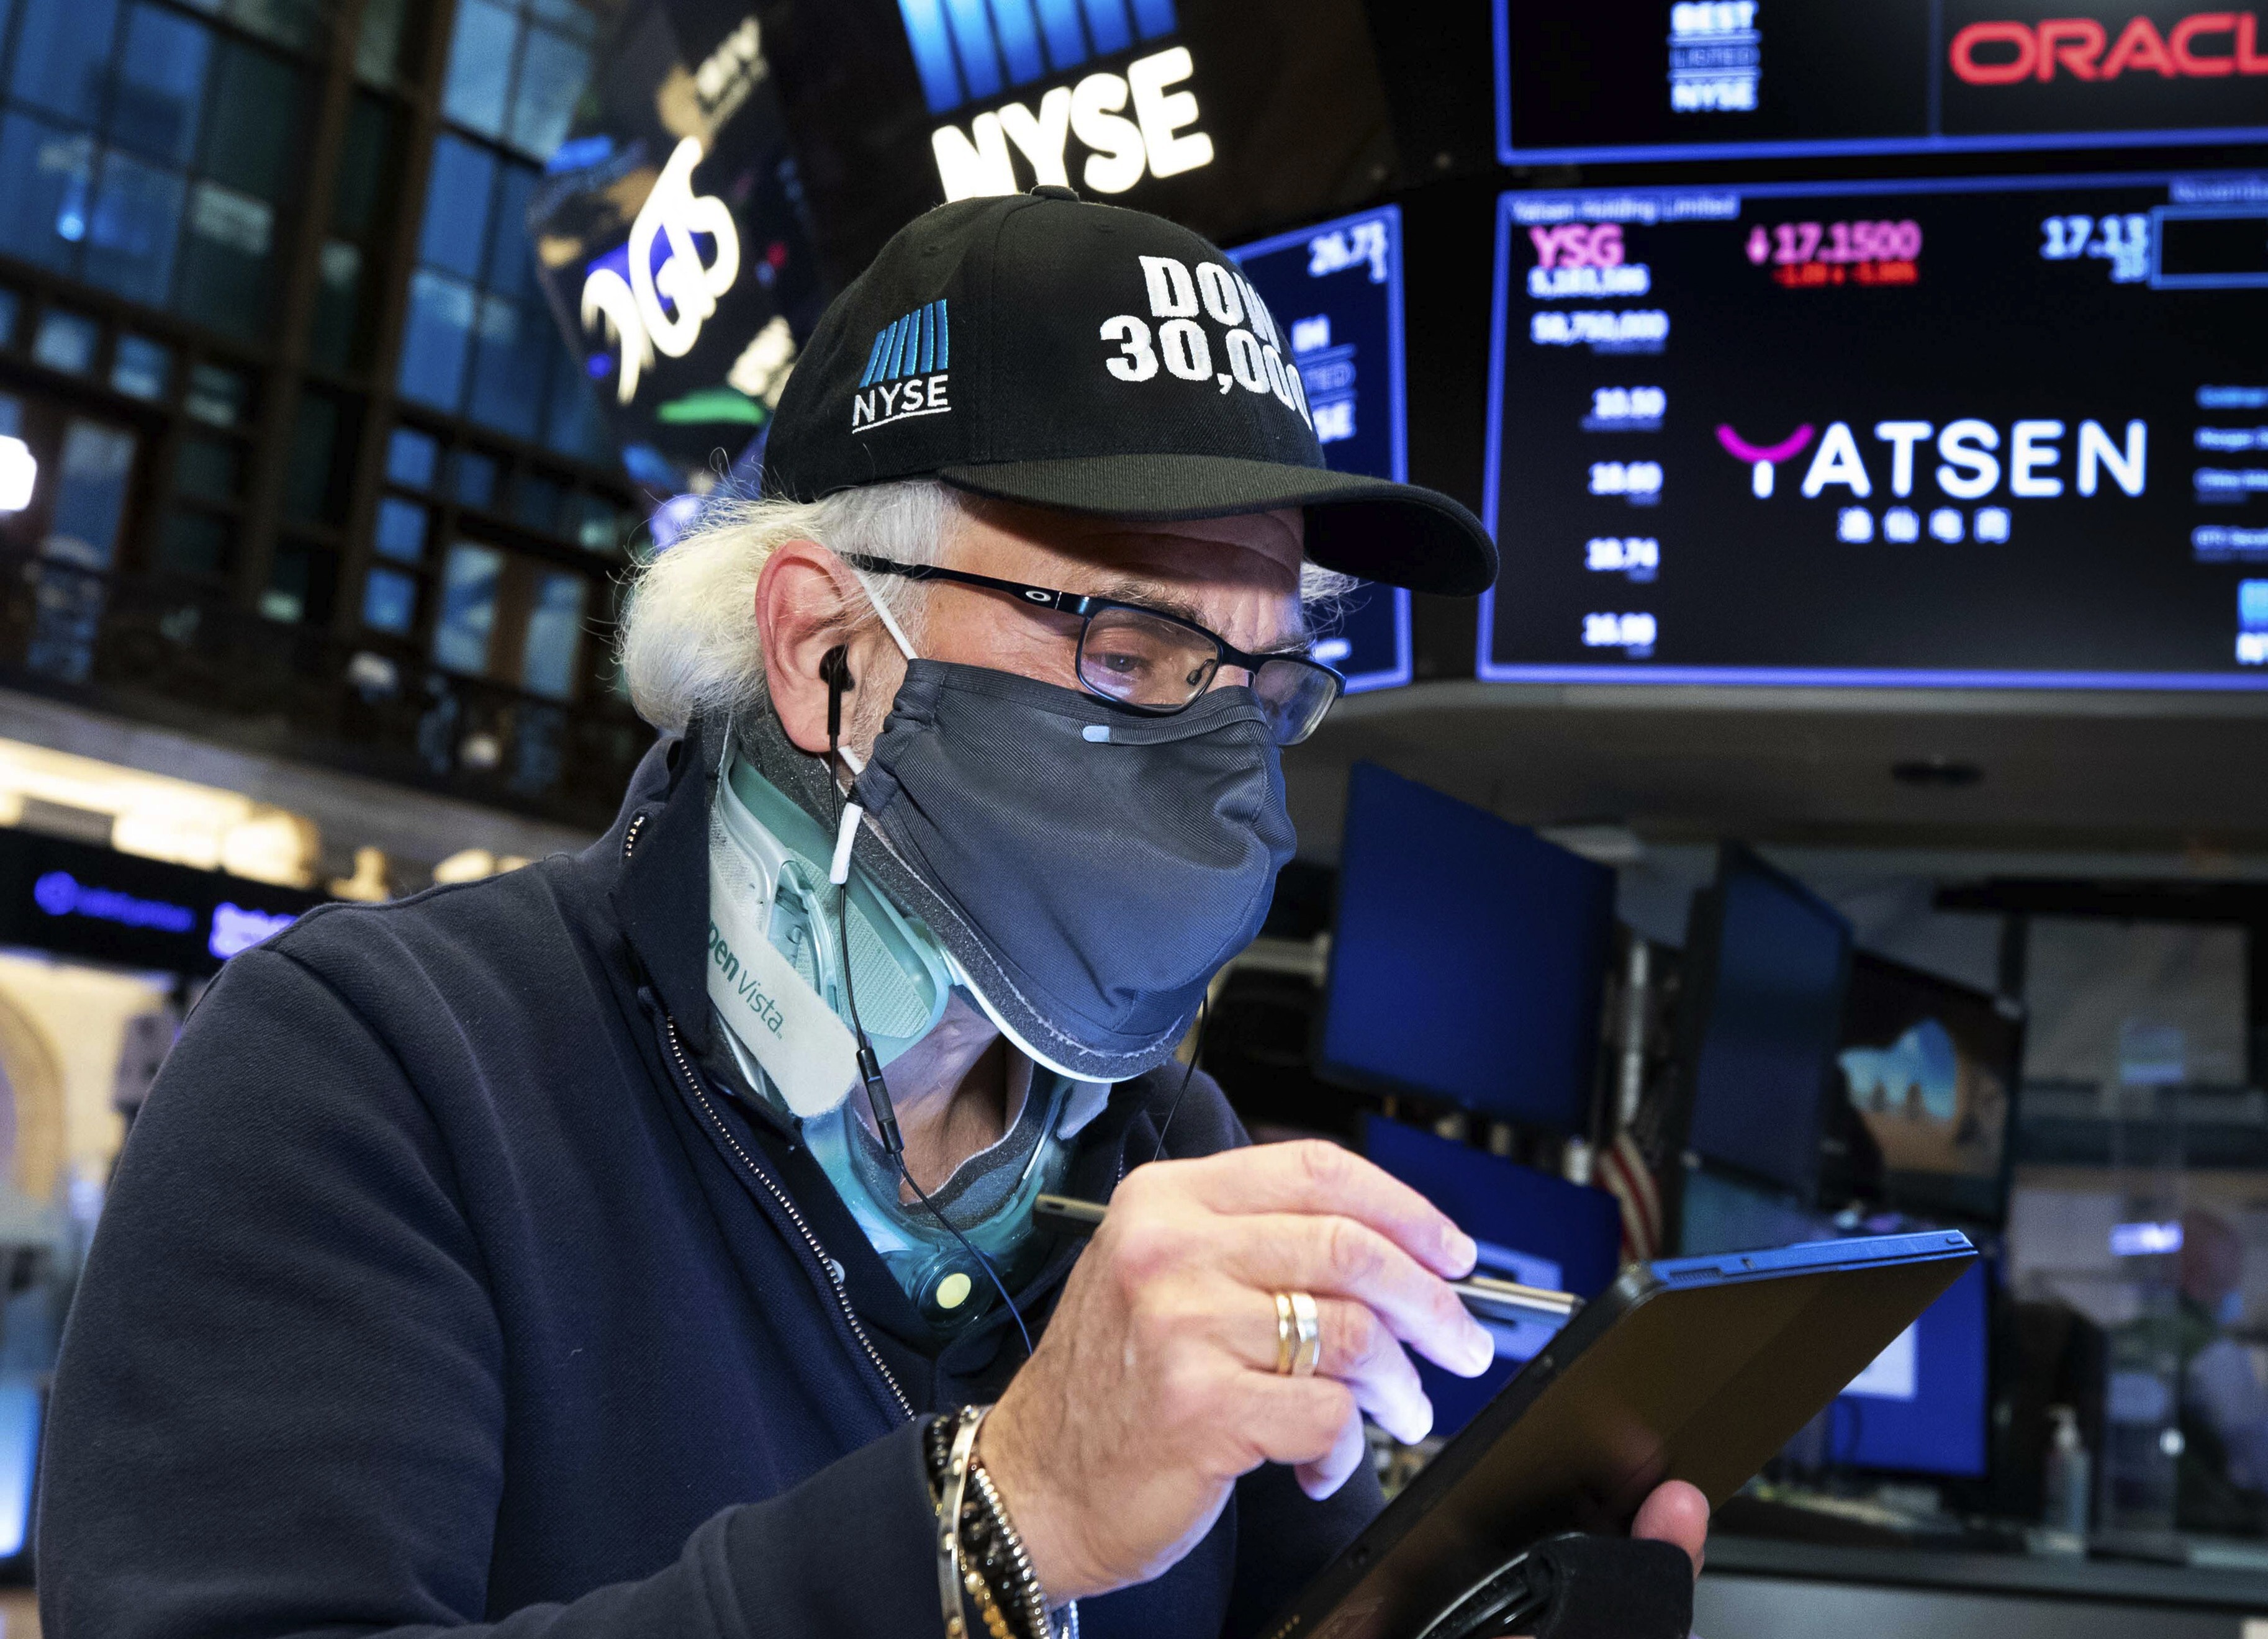 Trader Peter Tuchman wears a “Dow 30,000” hat as he works on the trading floor on November 24, when the Dow Jones Industrial Average closed above 30,000 points for the first time as progress in the development of coronavirus vaccines and news that the transition of power in the US to President-elect Joe Biden will finally begin kept investors in a buying mood. Photo: New York Stock Exchange via AP